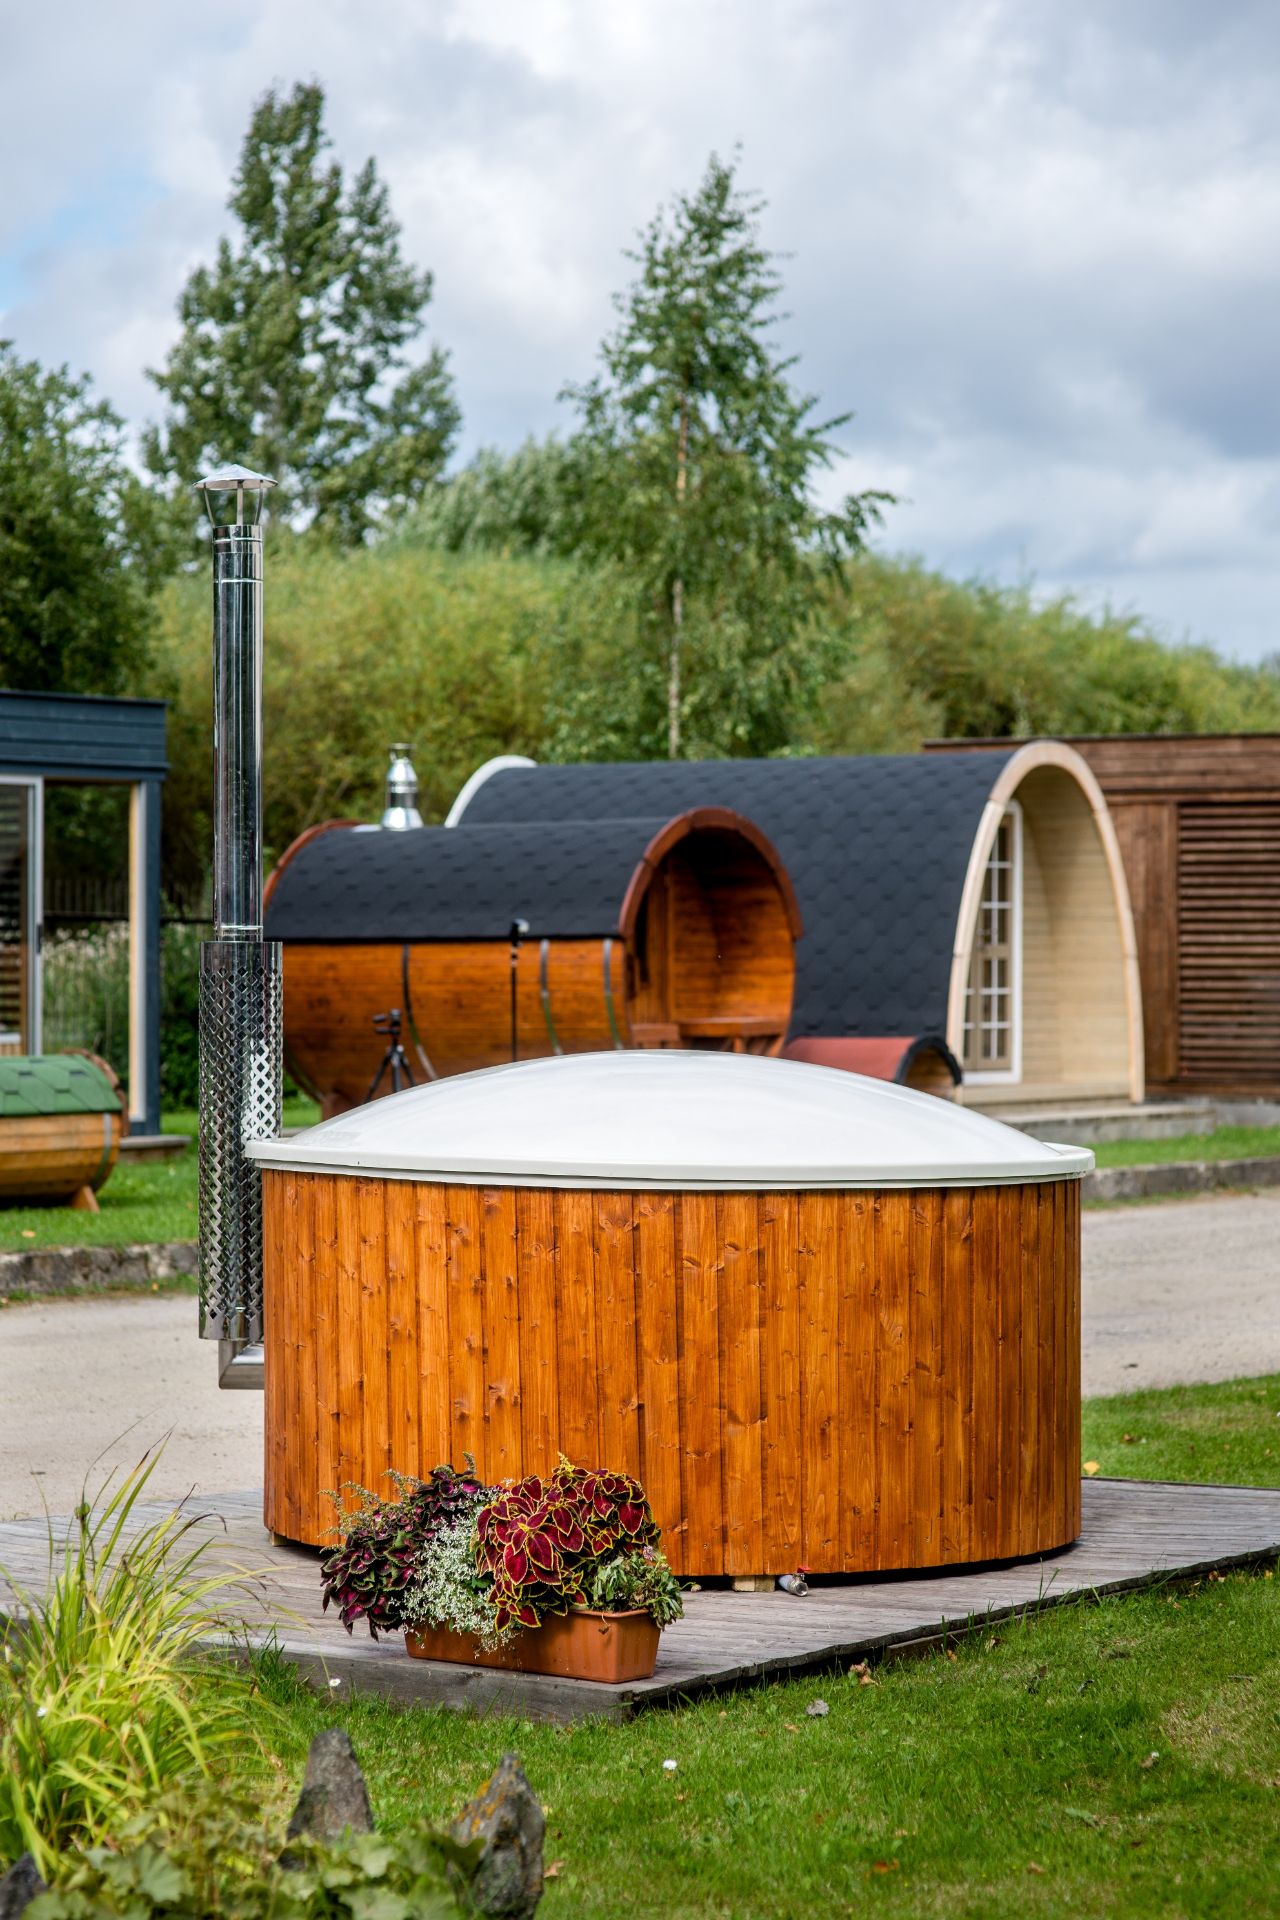 V Brand New Luxurious Extra Large Thermo Wood 1.8m Hot Tub With Air Bubble & Hydro Massage - Image 2 of 4